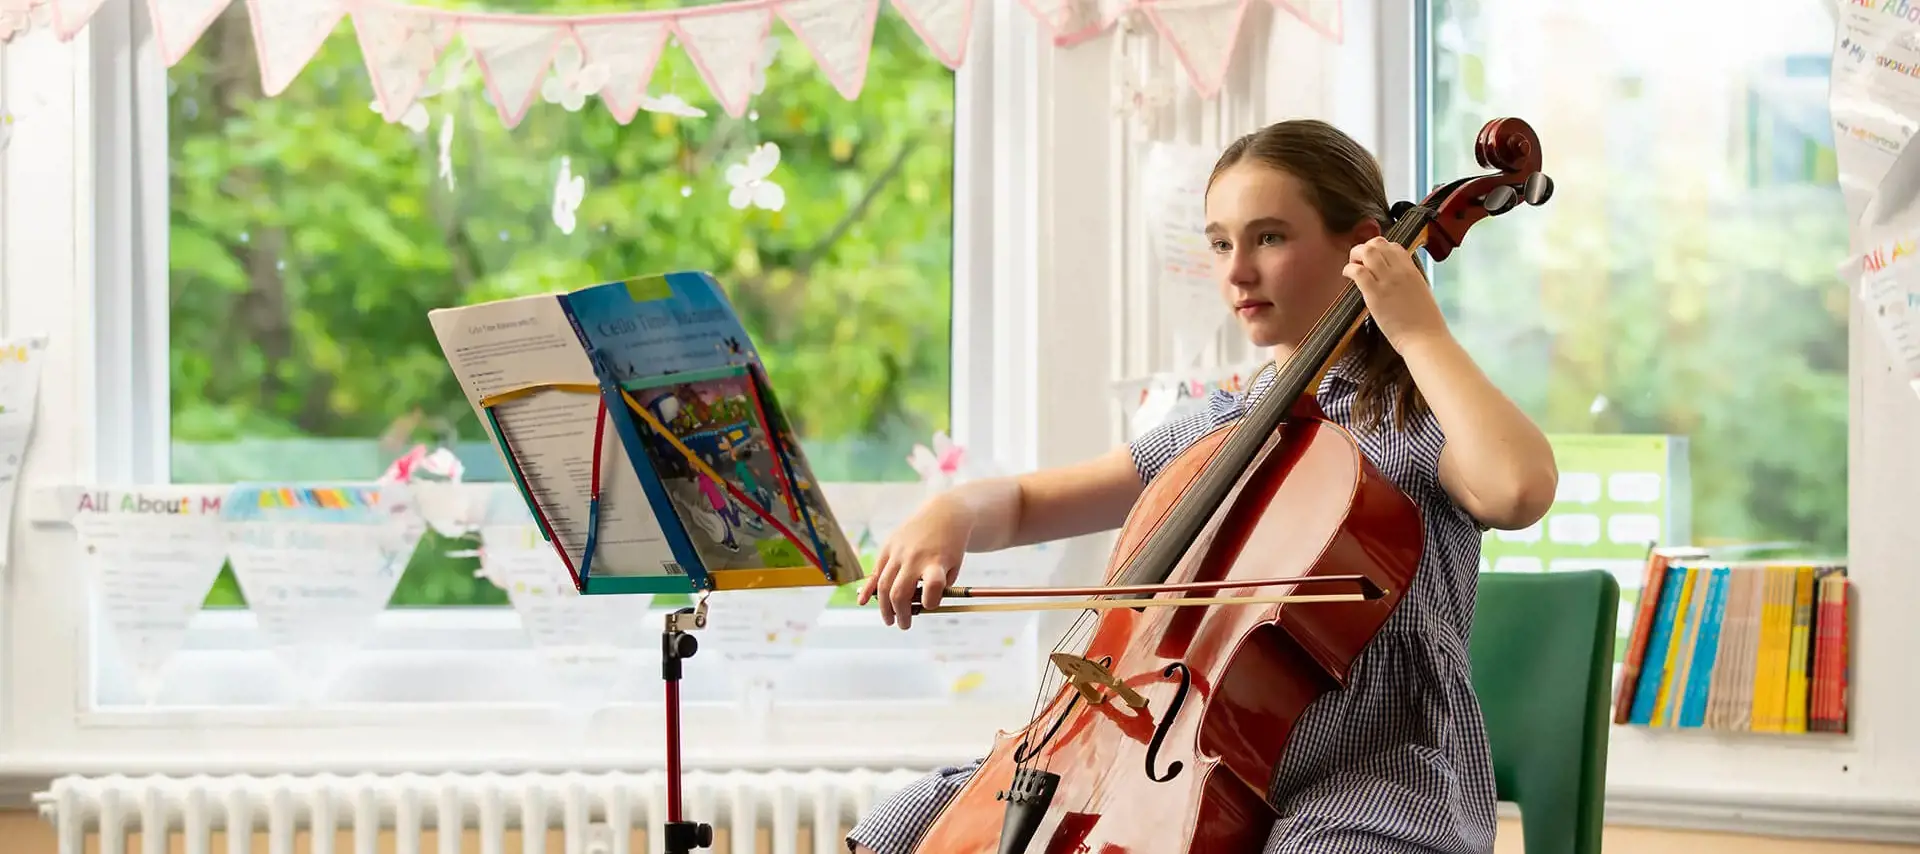 A Prep pupil playing the cello at The Gregg Prep School